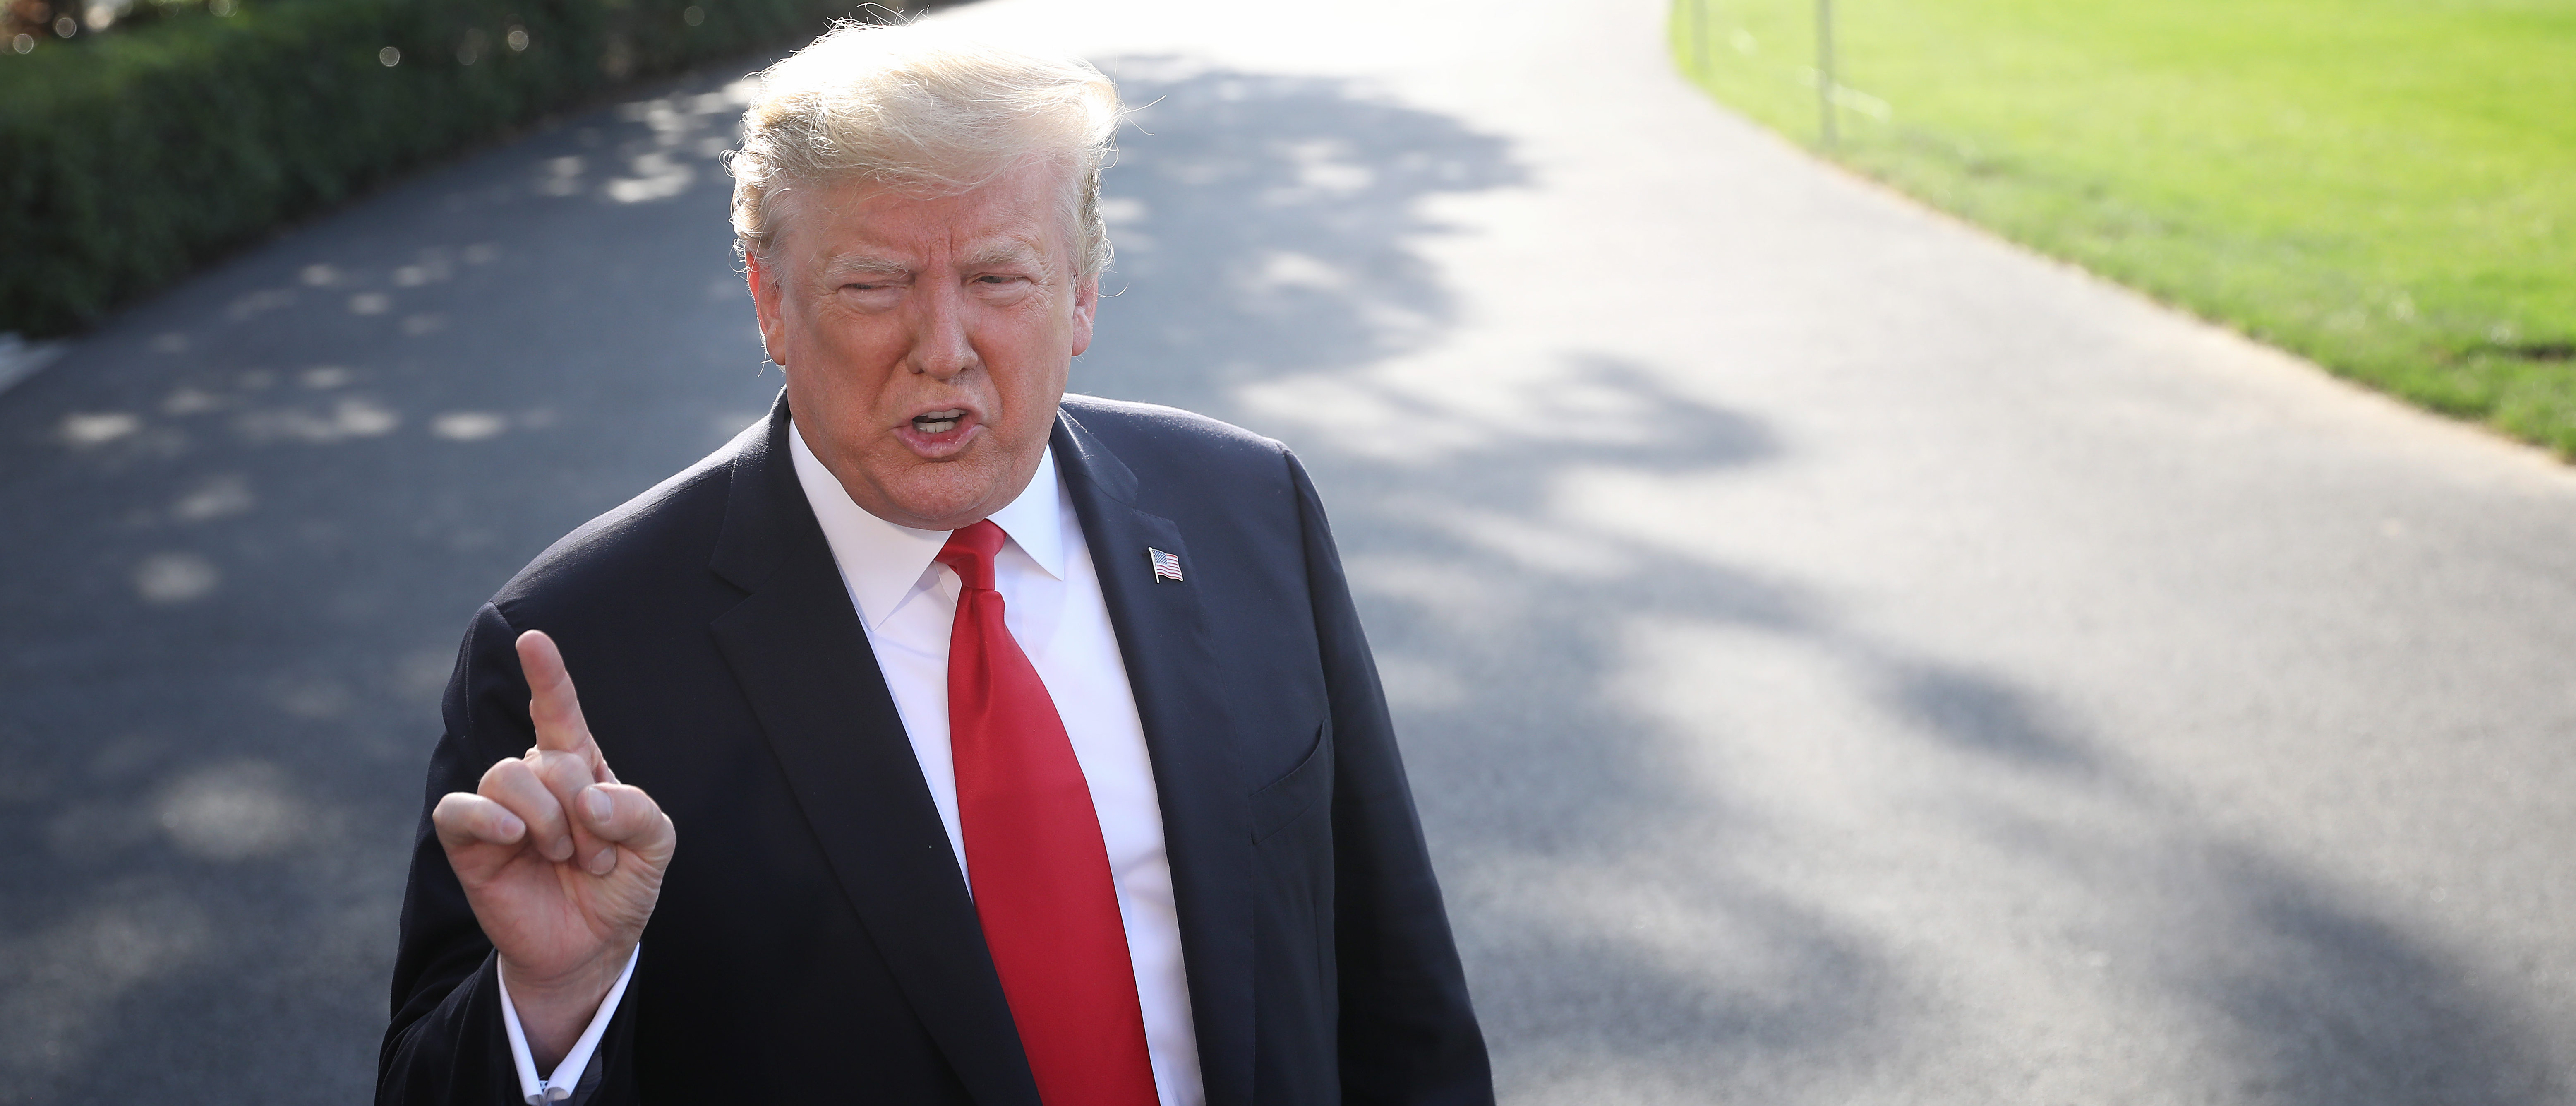 U.S. President Donald Trump answers questions on the comments of special counsel Robert Mueller while departing the White House May 30, 2019 in Washington, DC.(Win McNamee/Getty Images)